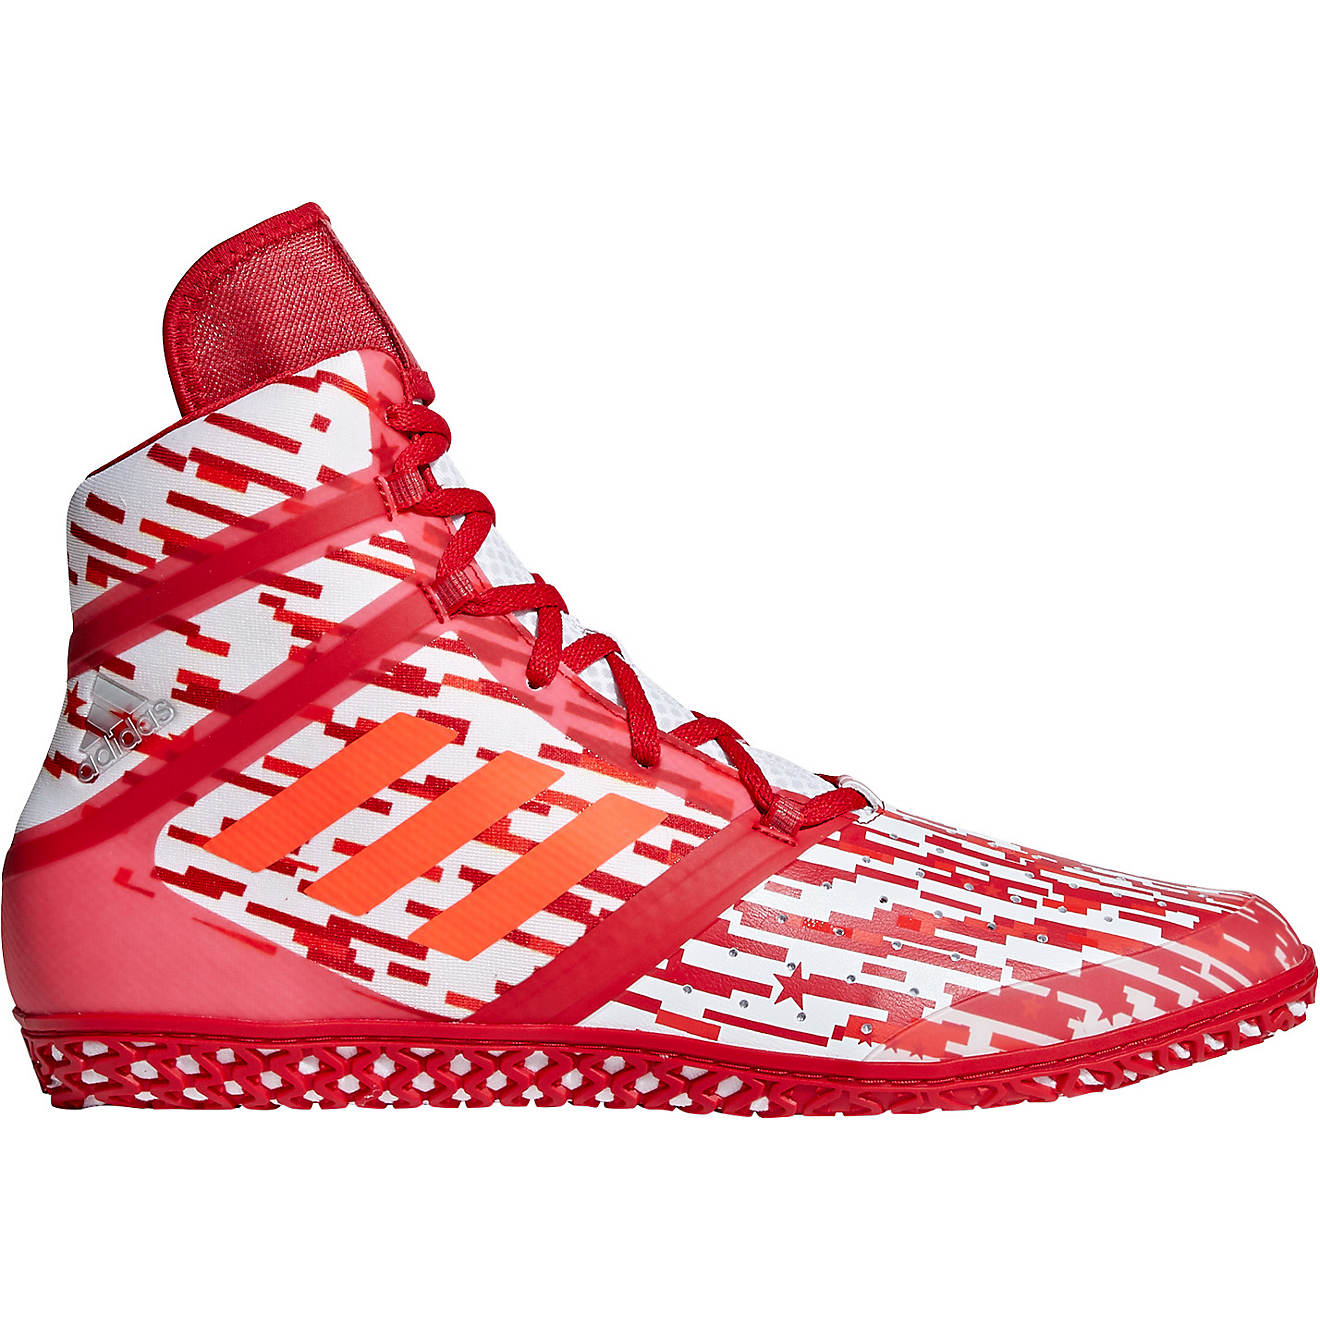 Lost next swear adidas Men's Flying Impact Wrestling Shoes | Academy